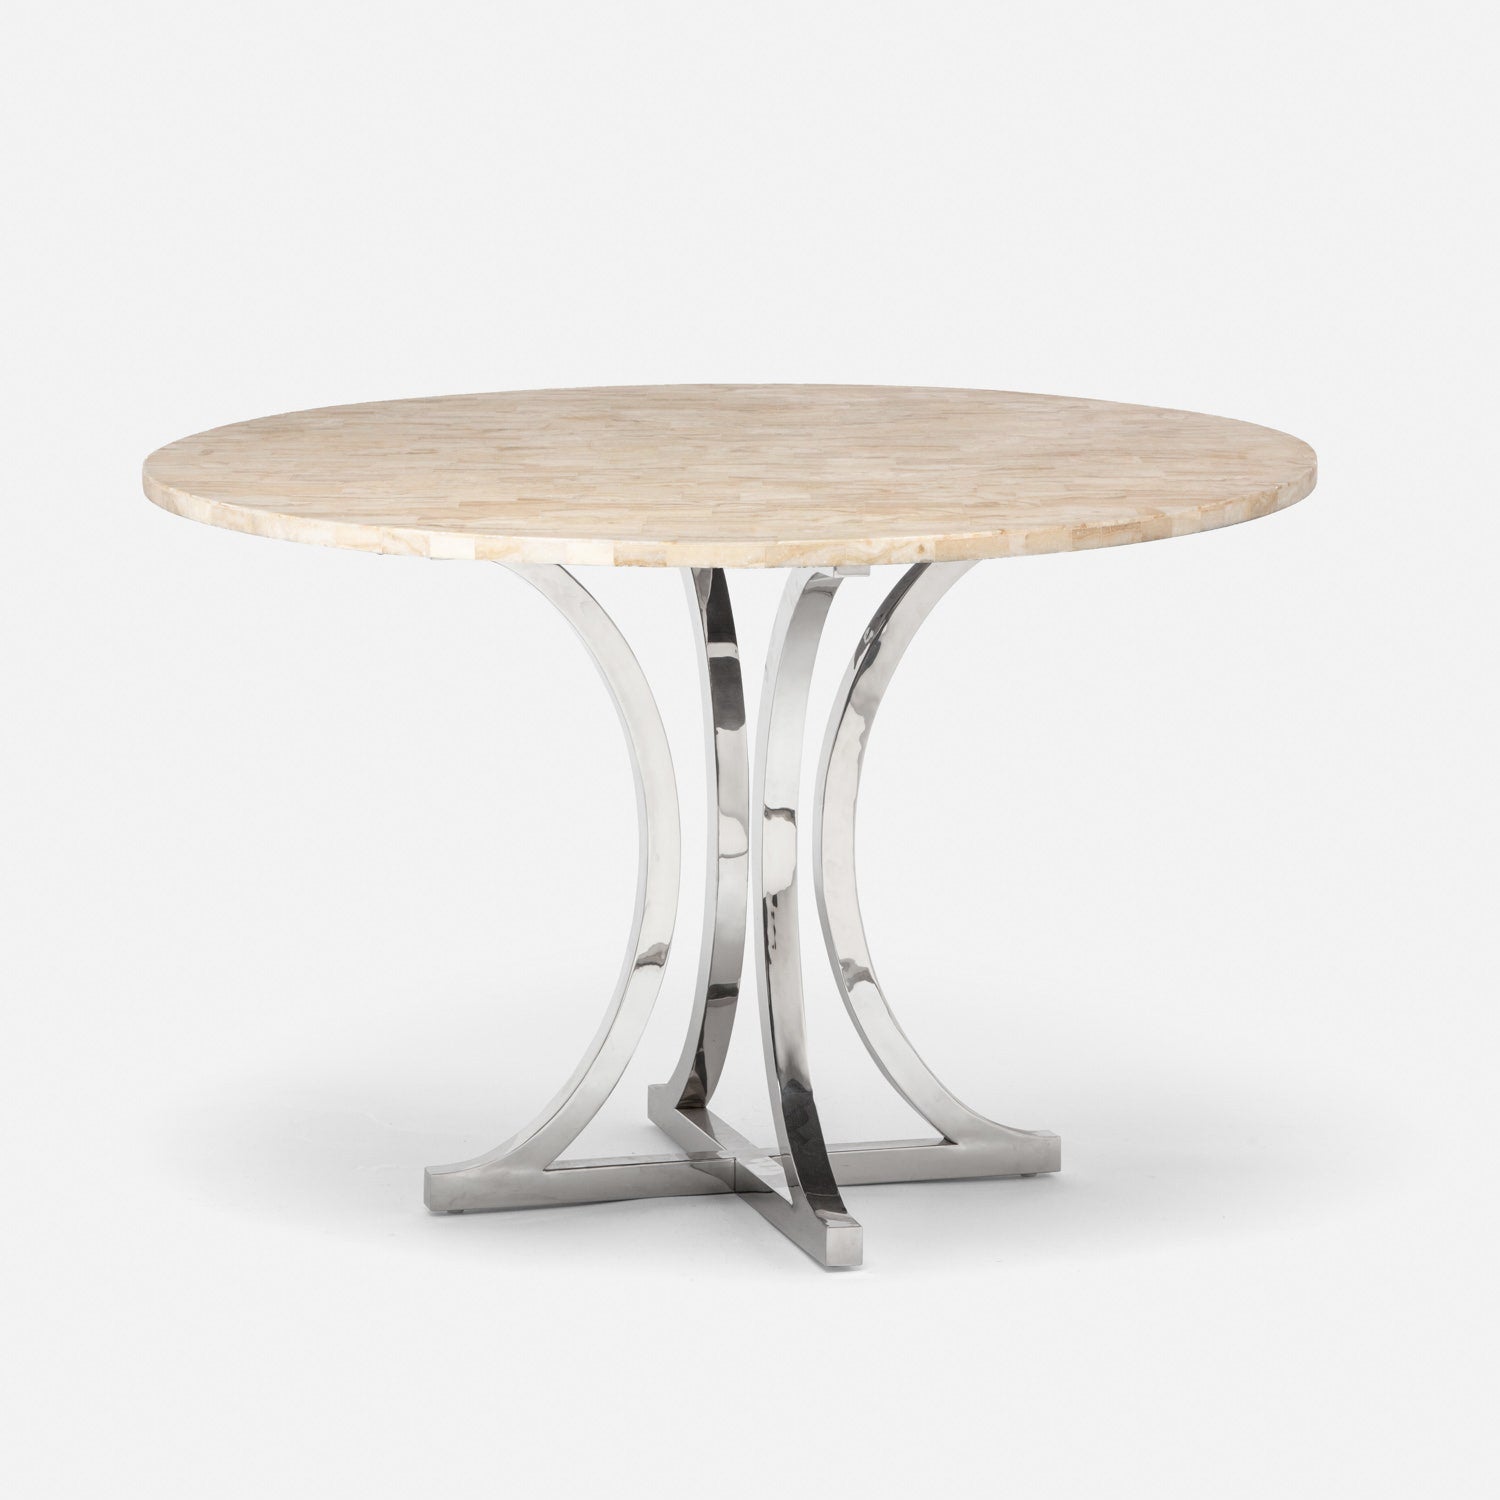 Made Goods Leighton 72" x 30" Polished Silver Steel Dinning Table With Round Beige Crystal Stone Table Top